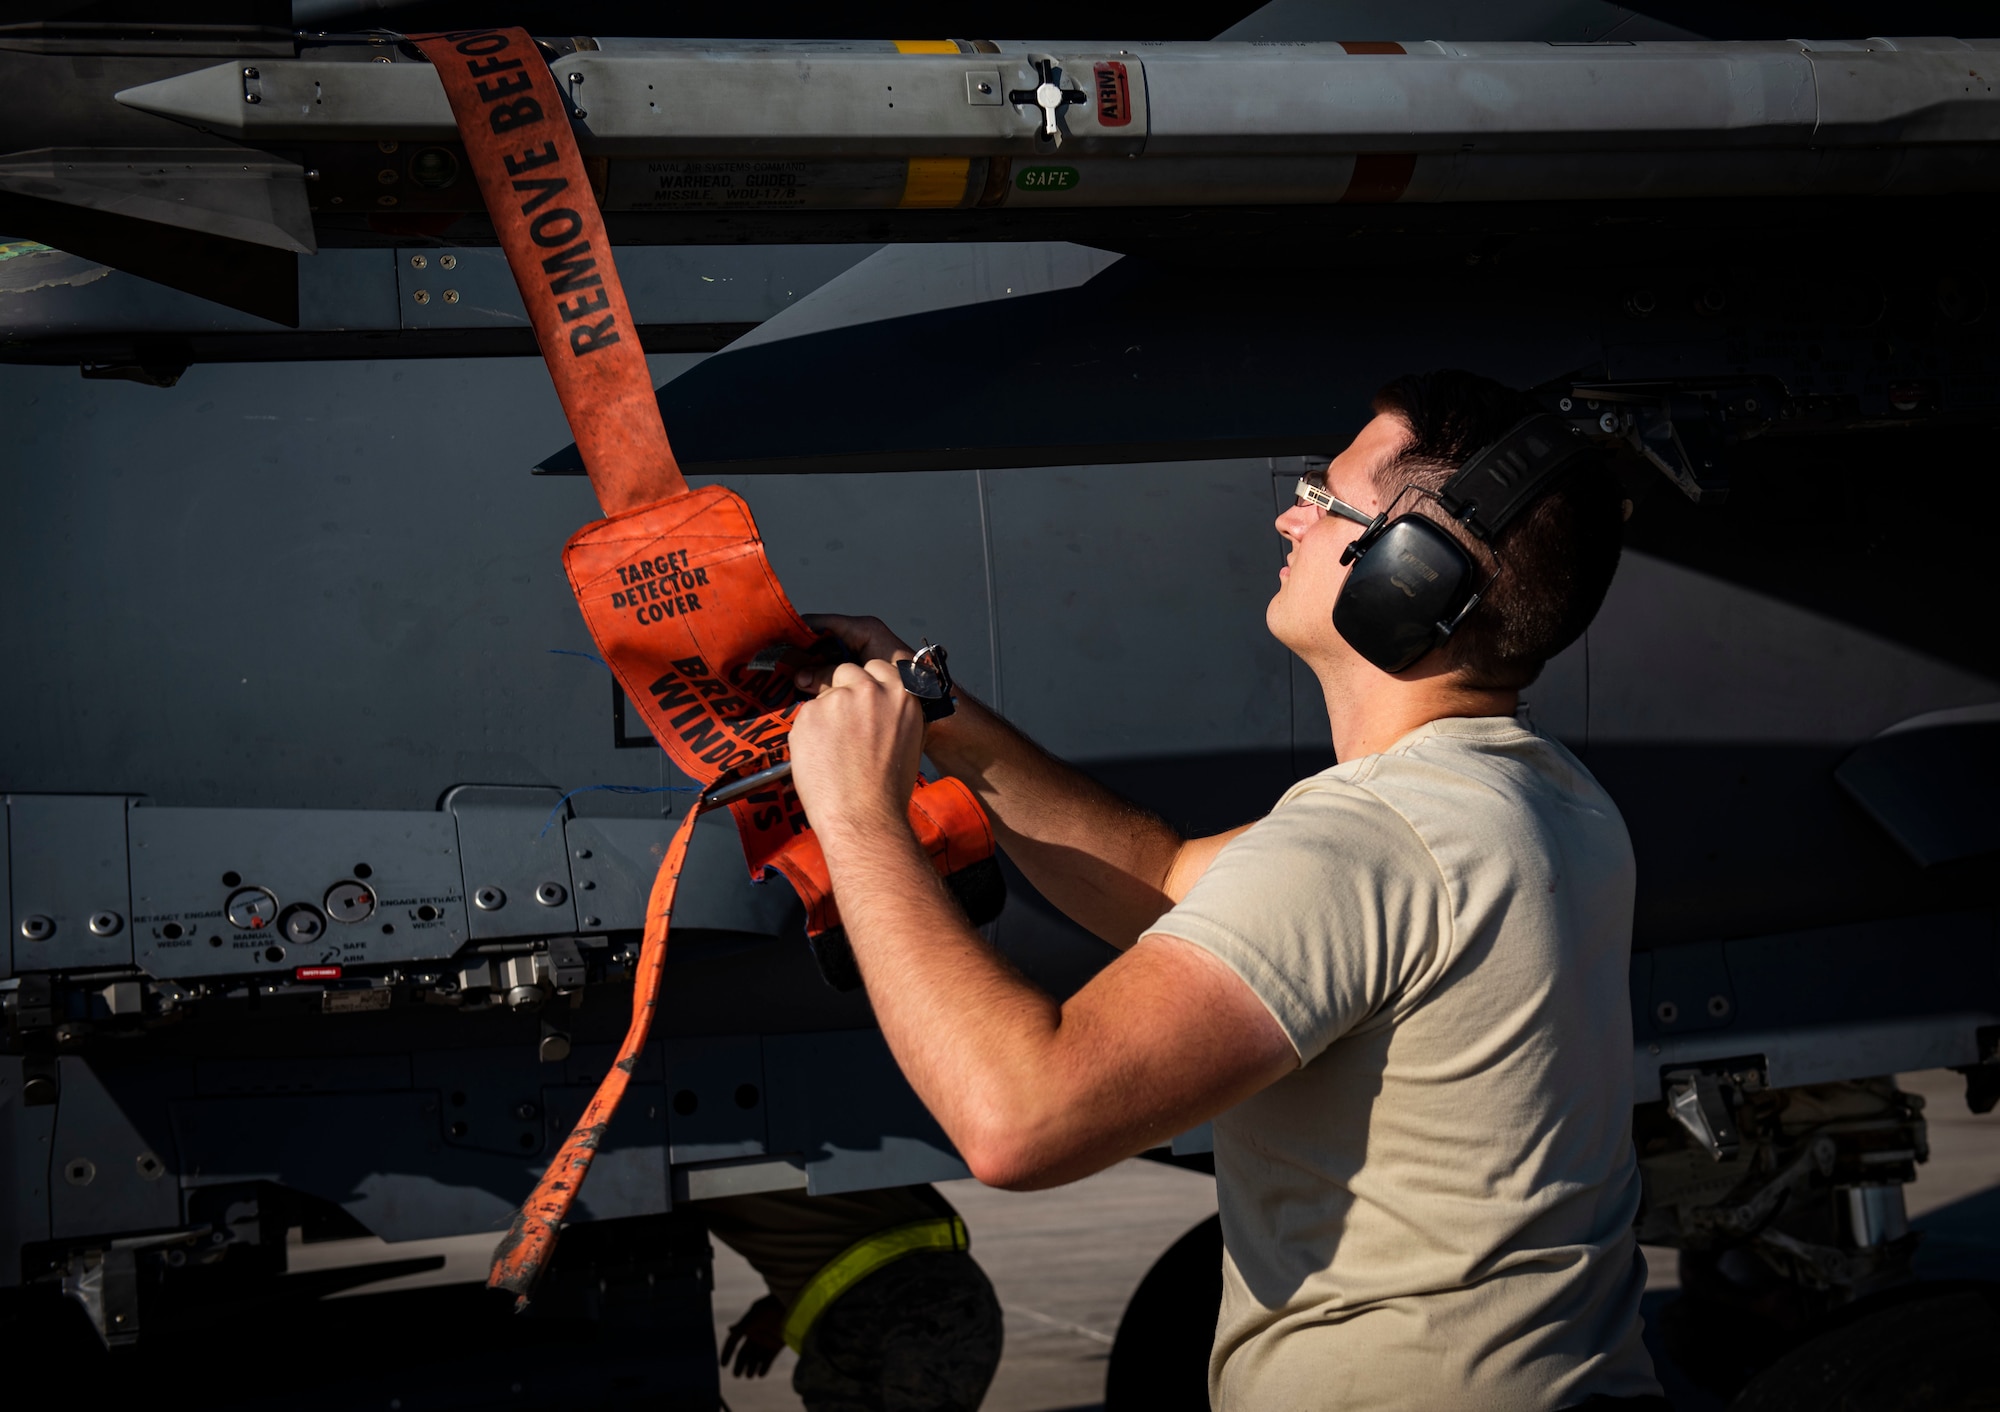 An Airman removes a "Remove Before Flight" streamer.